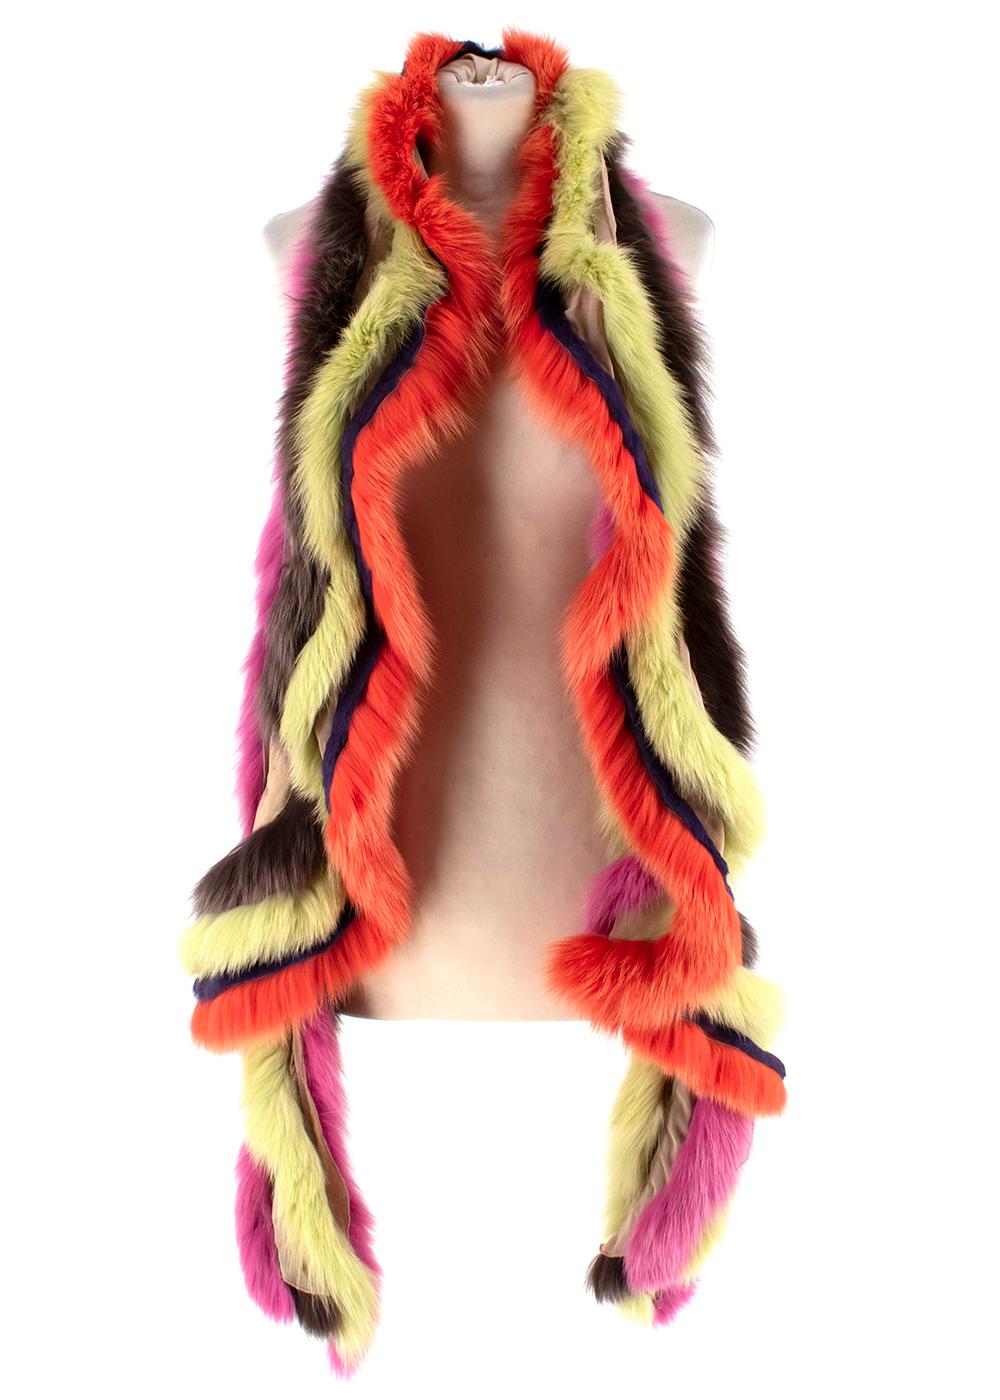 Maurizio Pecoraro Multicolor Fox Fur Scarf

-Made of luxurious fox fur 
-Striped pattern 
-Beautiful fresh hues 
-Curly effect 
-Elegant cheerful design 

Materials:
There is no care label but we believe it to be fox fur 

Specialized cleaning only